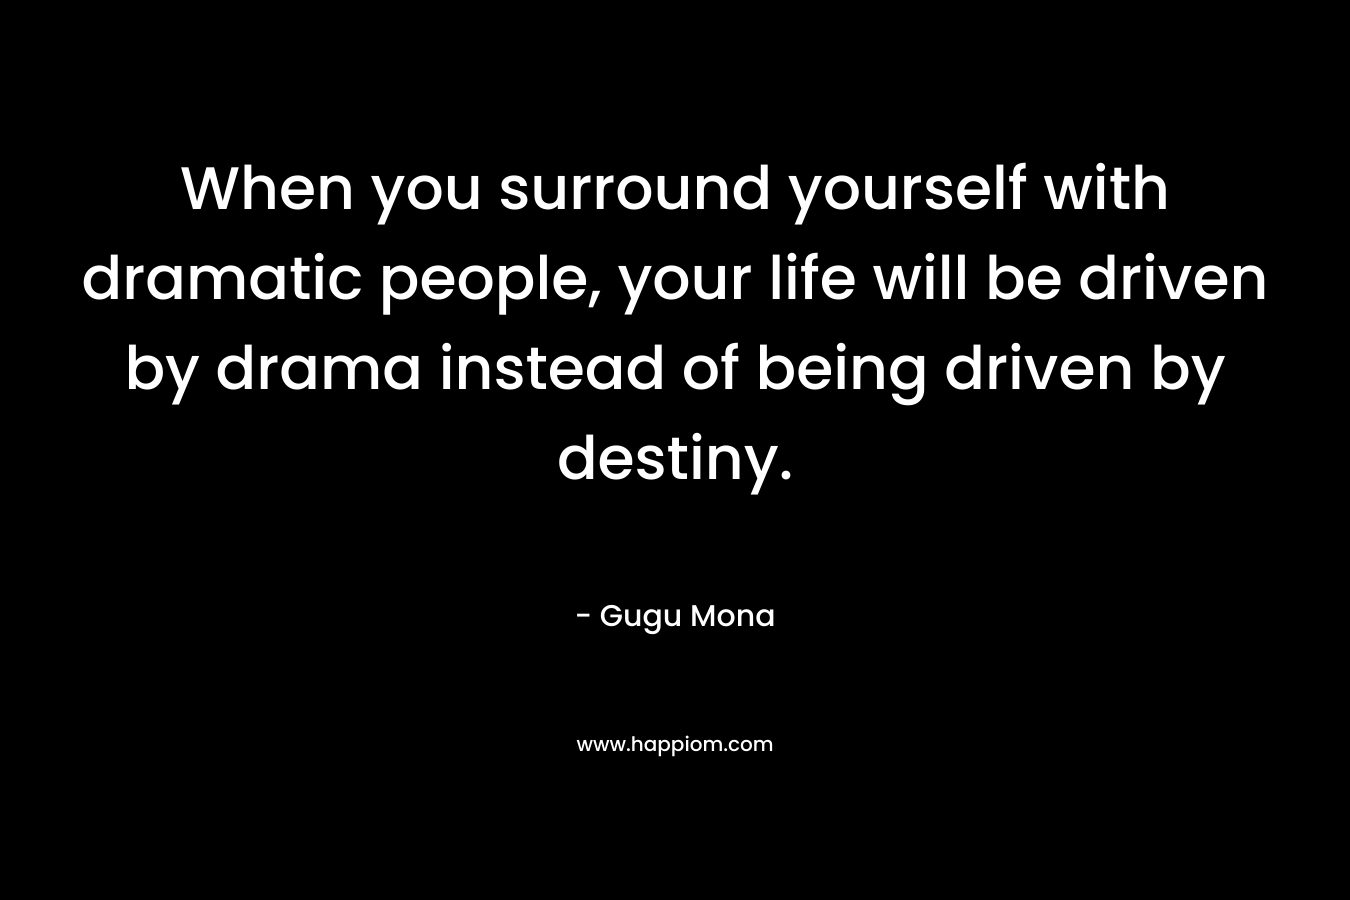 When you surround yourself with dramatic people, your life will be driven by drama instead of being driven by destiny.